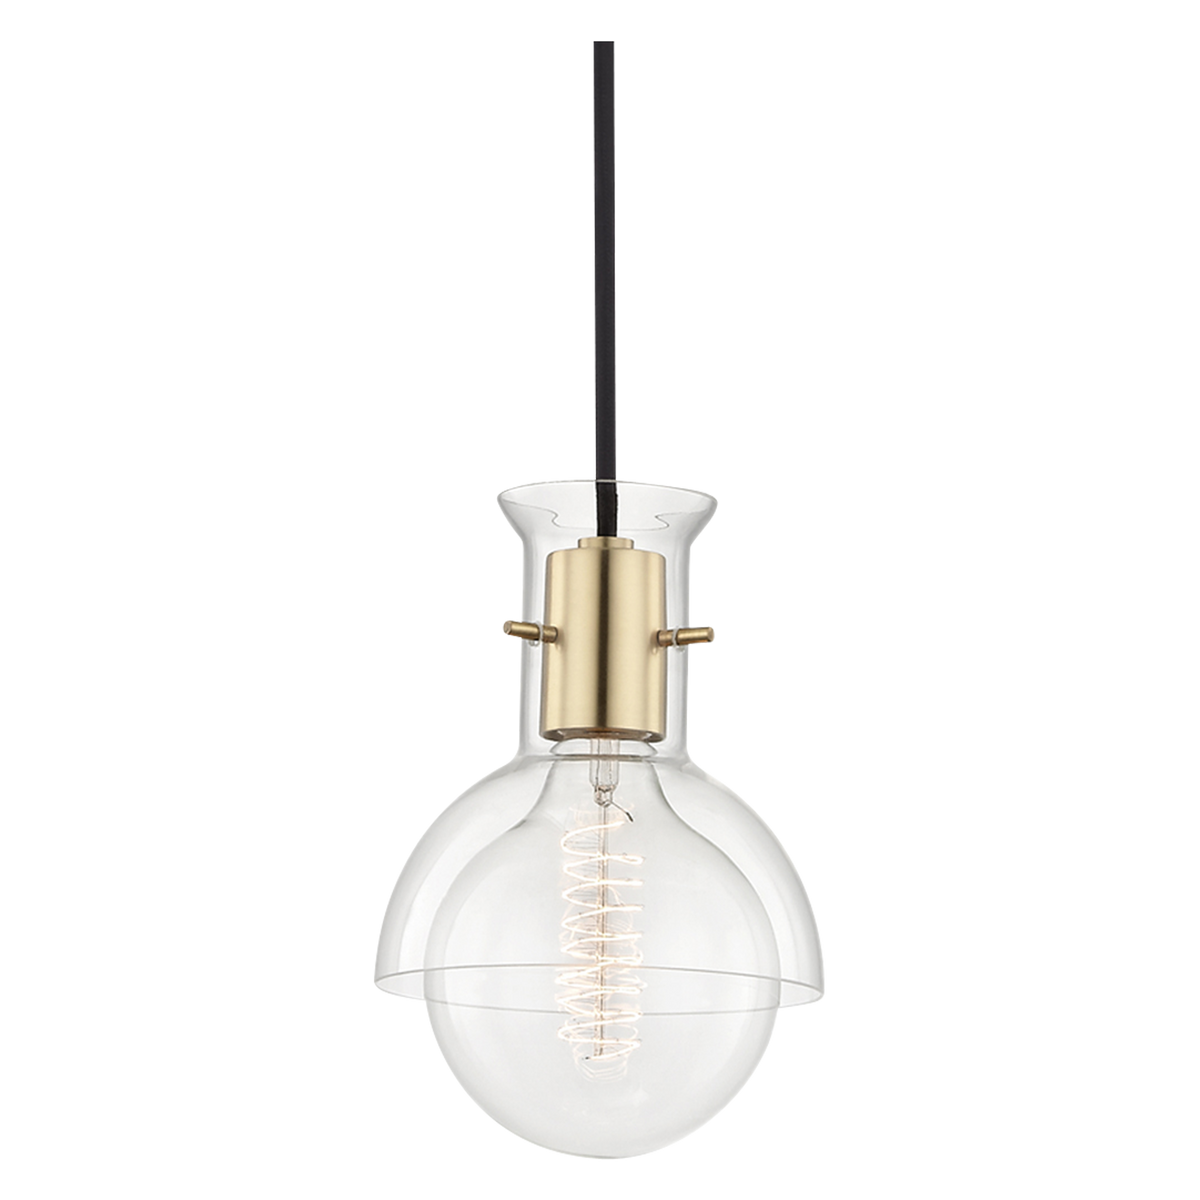 A round statement bulb is housed within a simple clear glass shade and aged brass socket in this chic contemporary pendant.